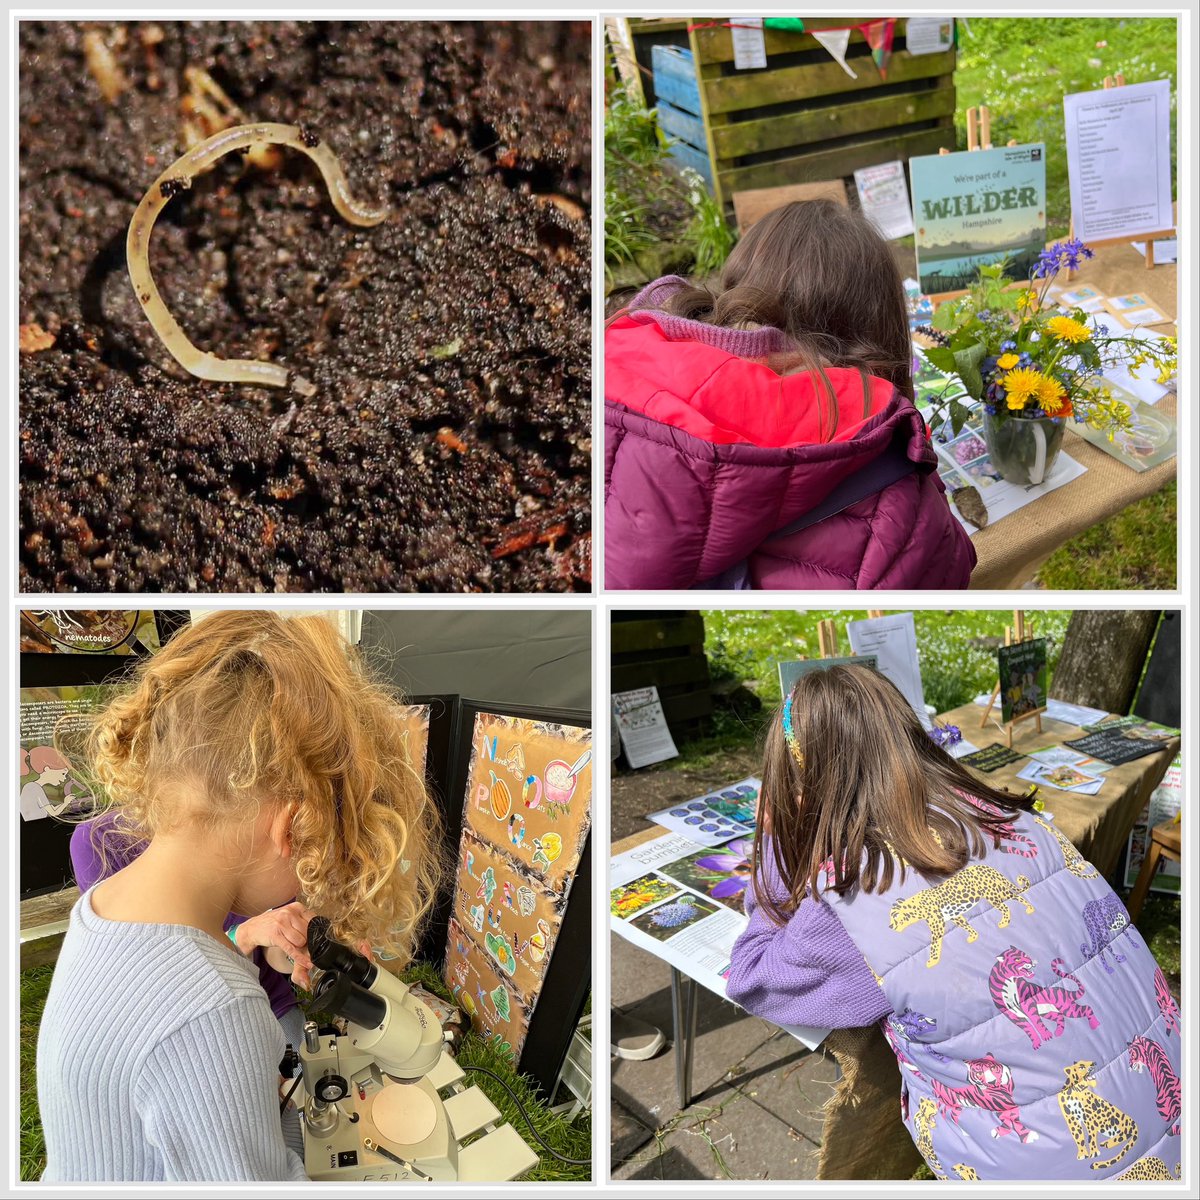 Wilder Lymington. Lots of interest in our #Peatfree compost @peatfreeapril @GreenHampshire @Transitiontog Children loved seeing our worm compost under microscopes: springtails, tiny white worms & some just colouring up. Hope some of these chldn were from schools who made bunting!